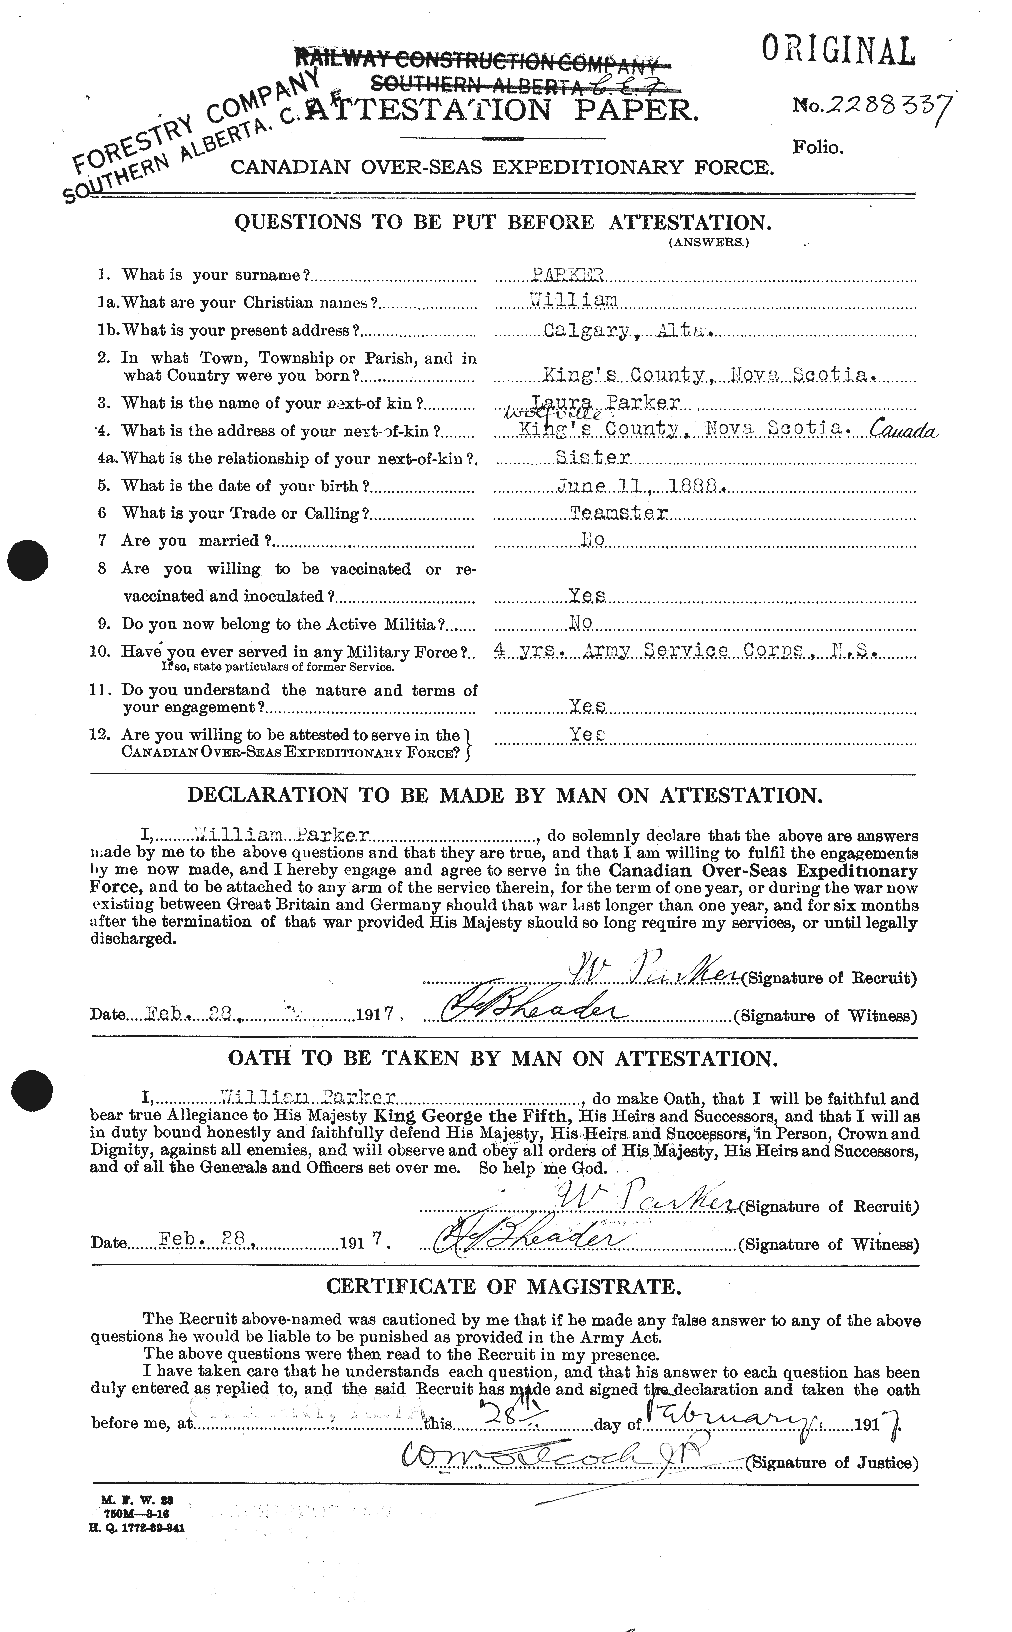 Personnel Records of the First World War - CEF 565713a